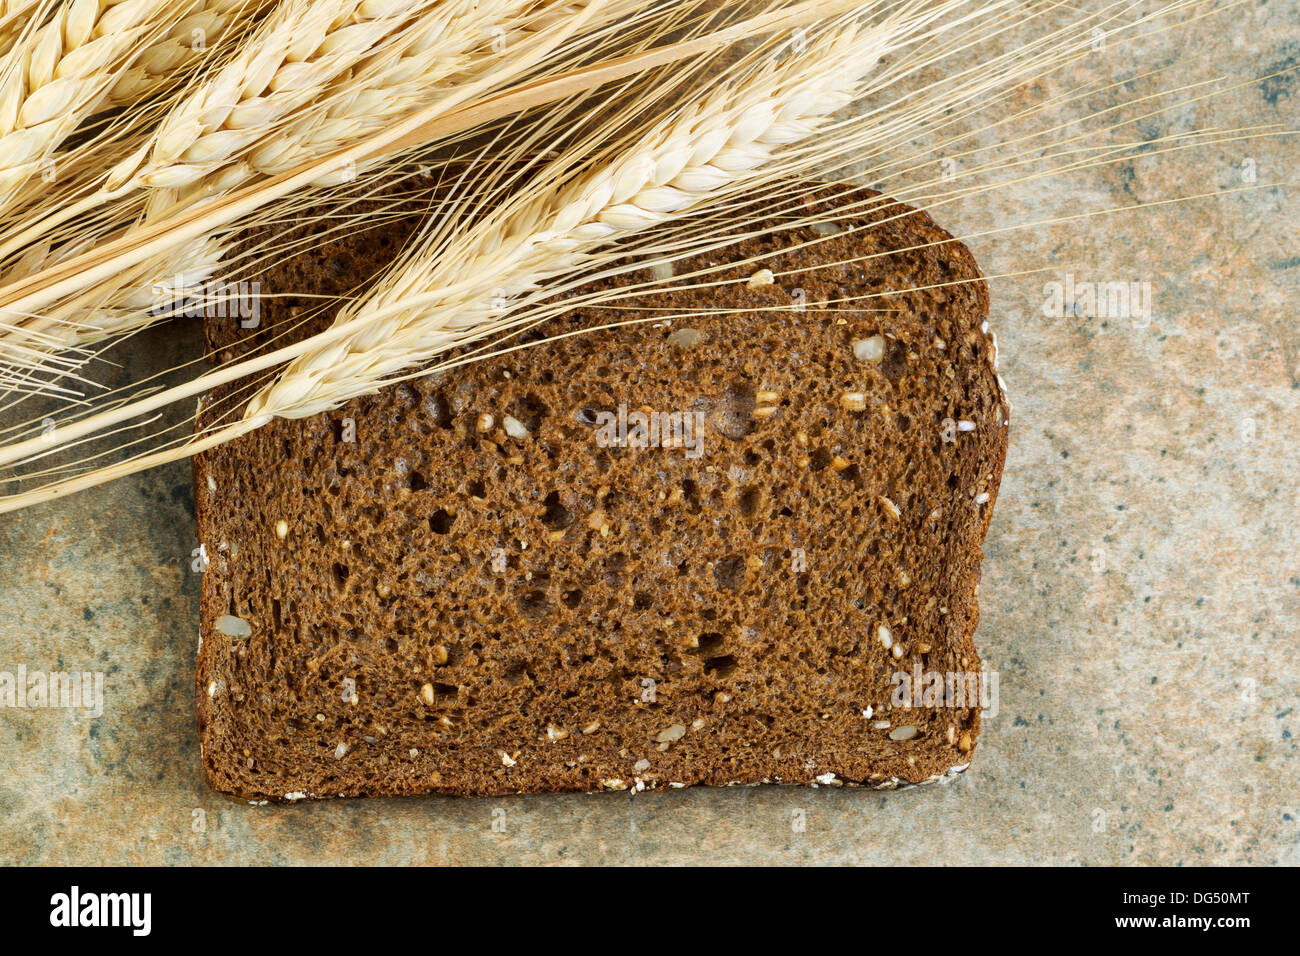 Horizontal photo of a single slice of sweet dark whole grain bread with dried wheat stalks on natural stone counter top Stock Photo